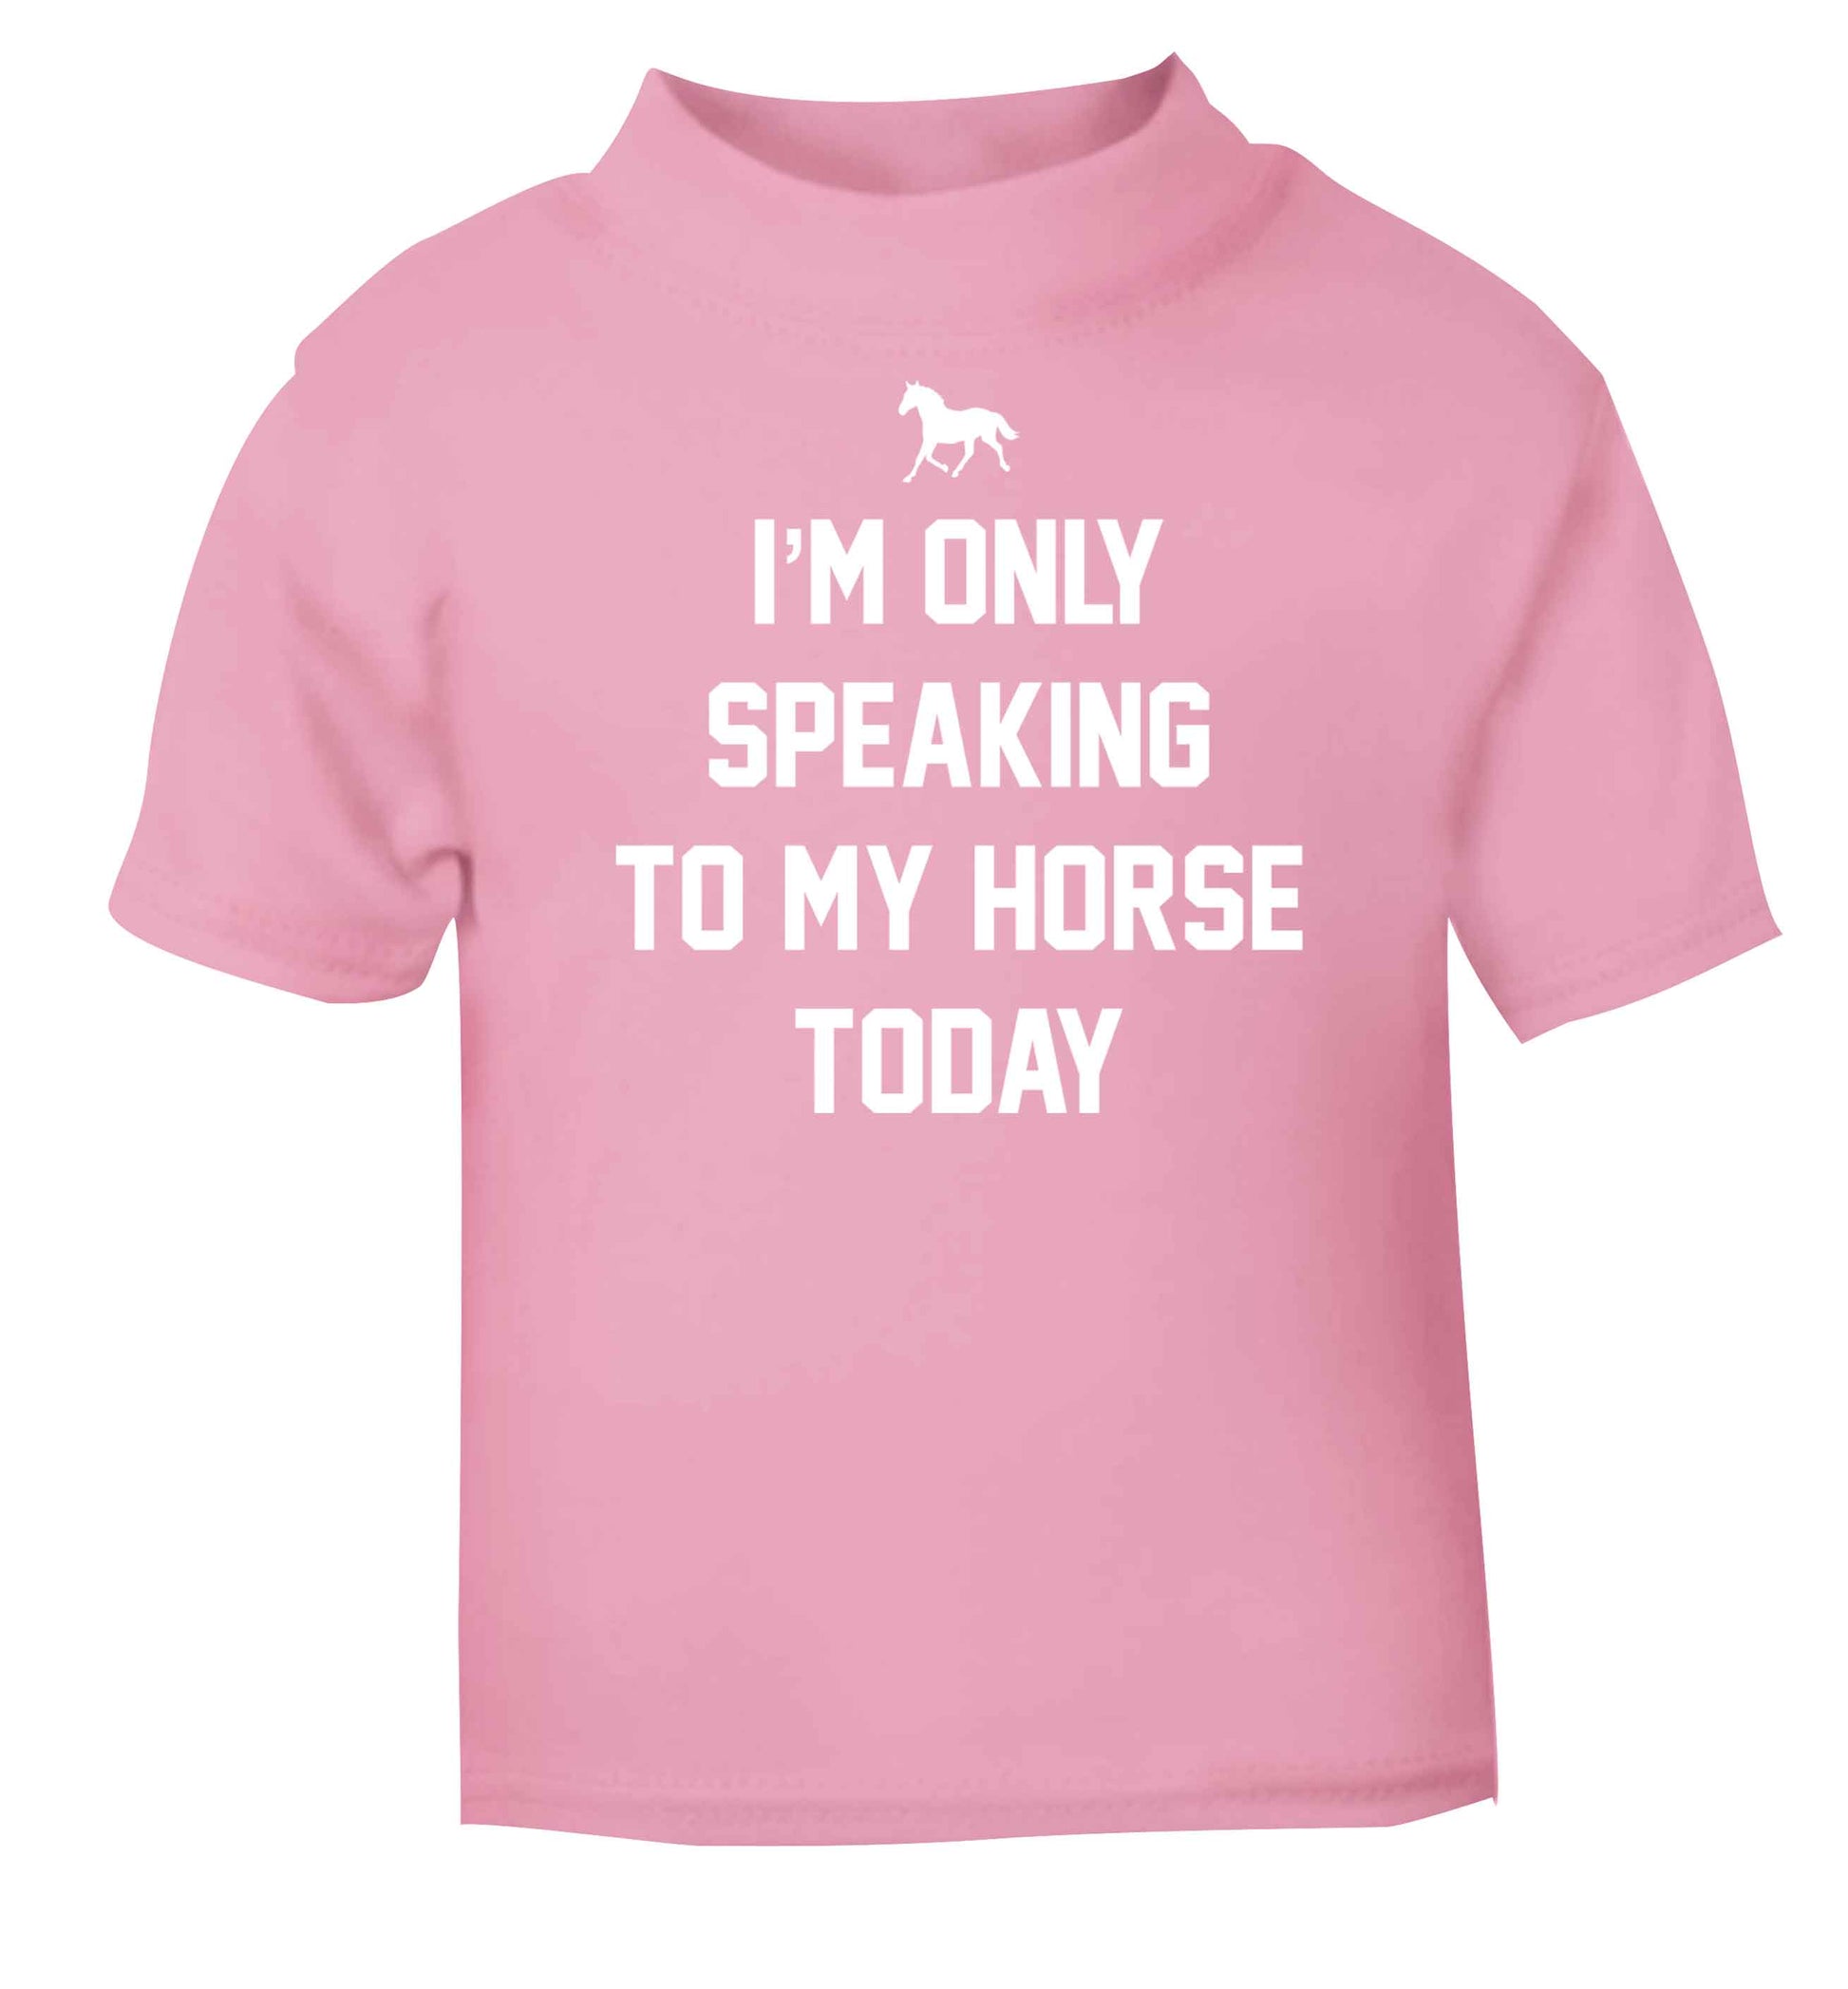 I'm only speaking to my horse today light pink baby toddler Tshirt 2 Years